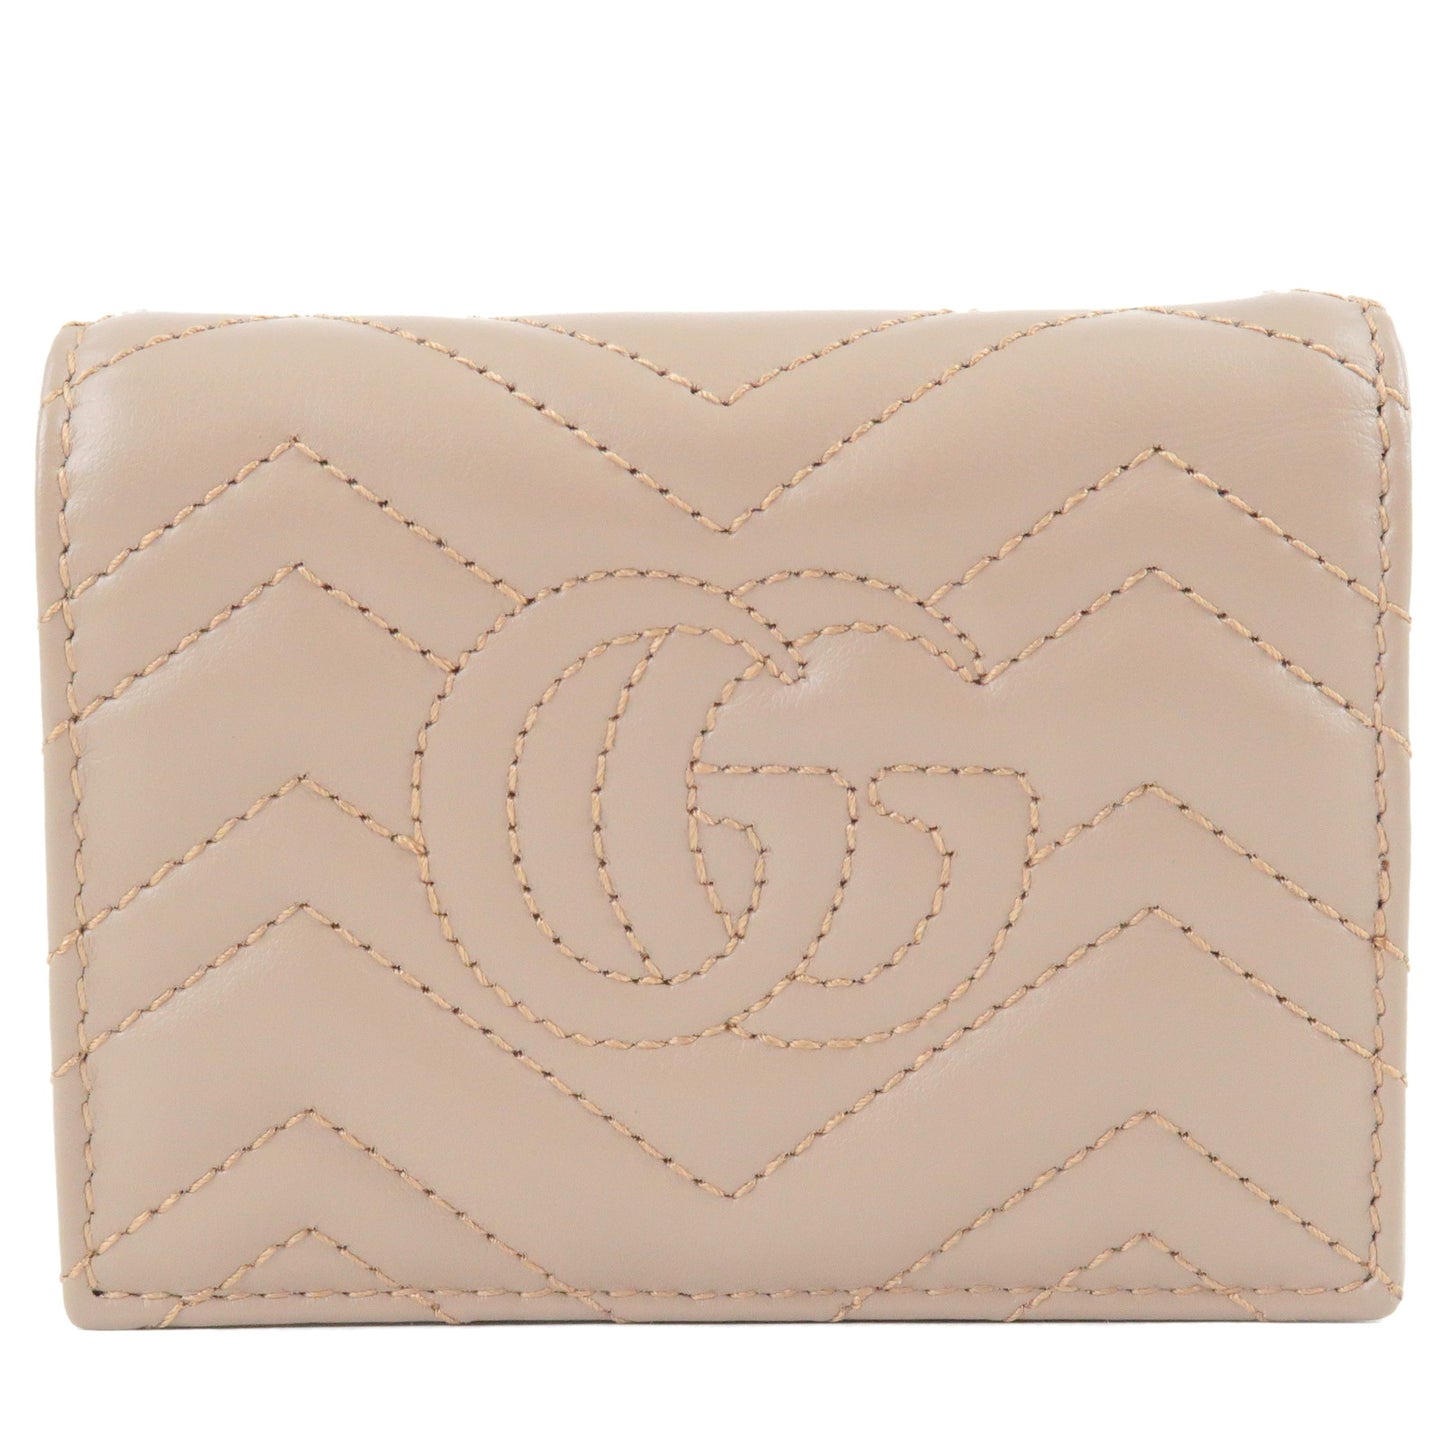 GUCCI Marmont Leather Bifold Small Wallet Pink Beige 466492